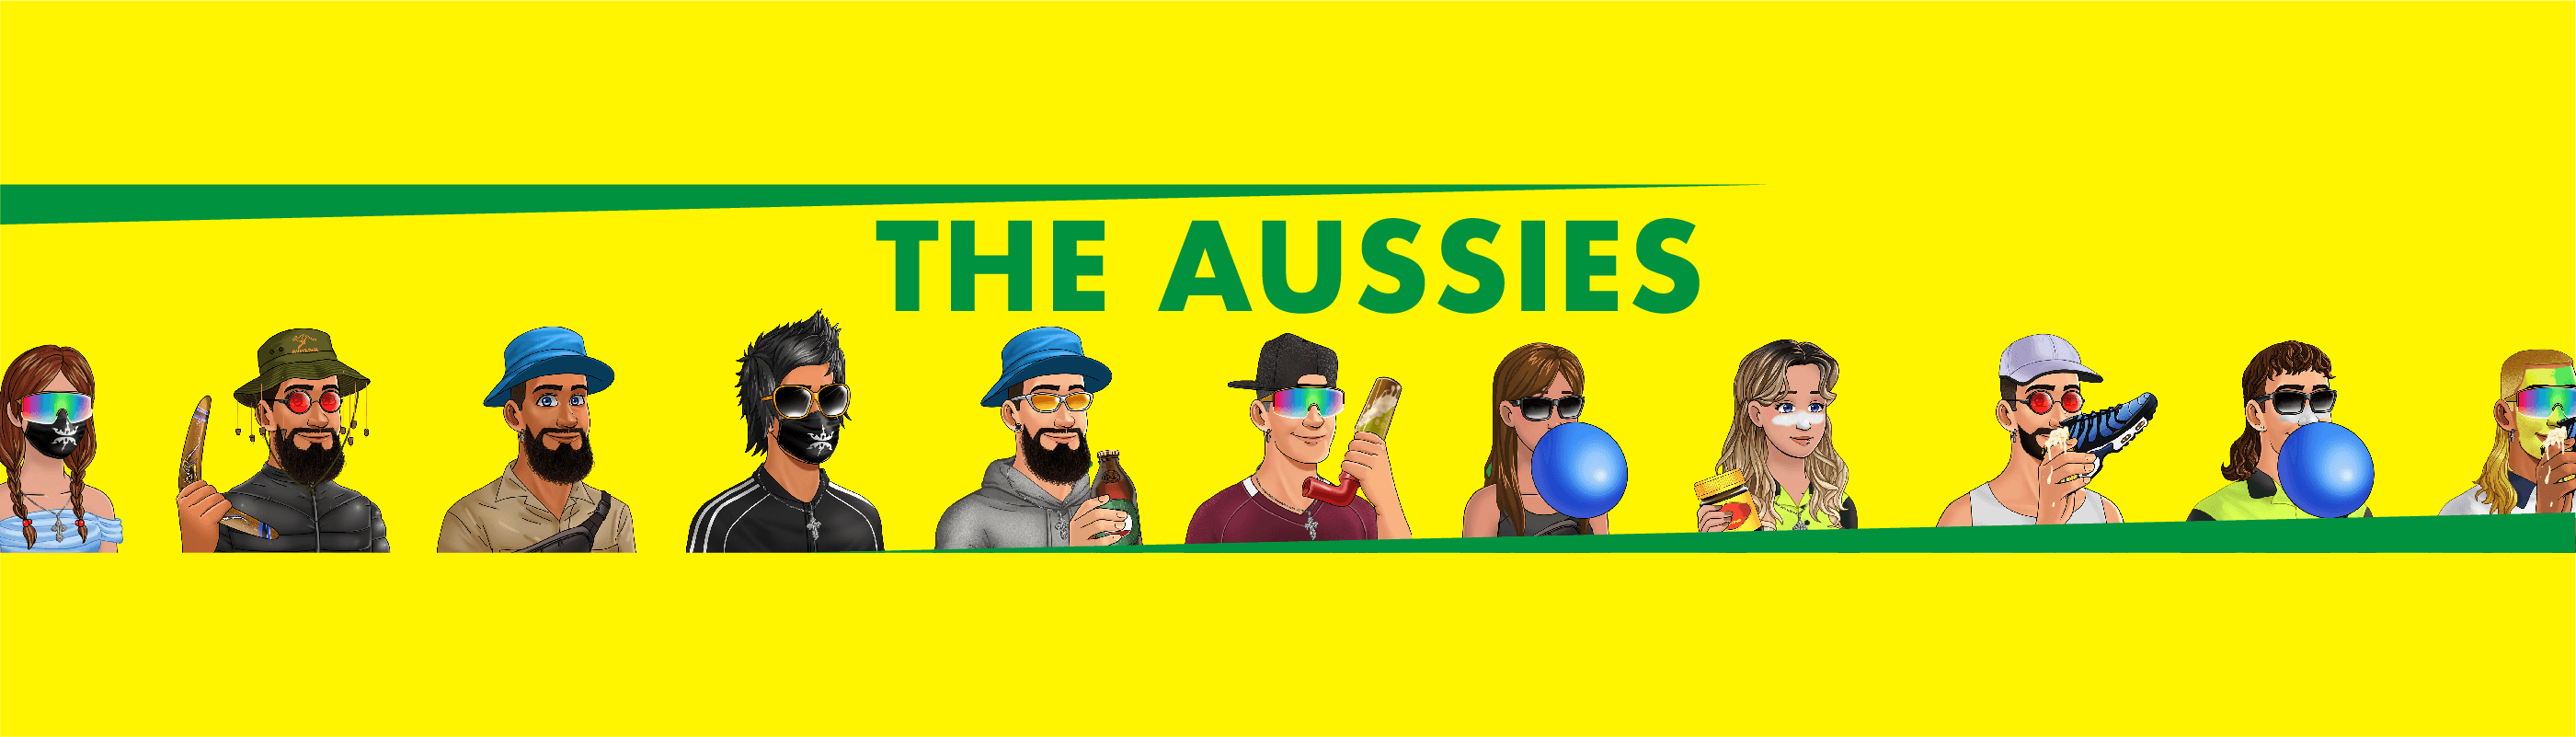 TheAussies banner